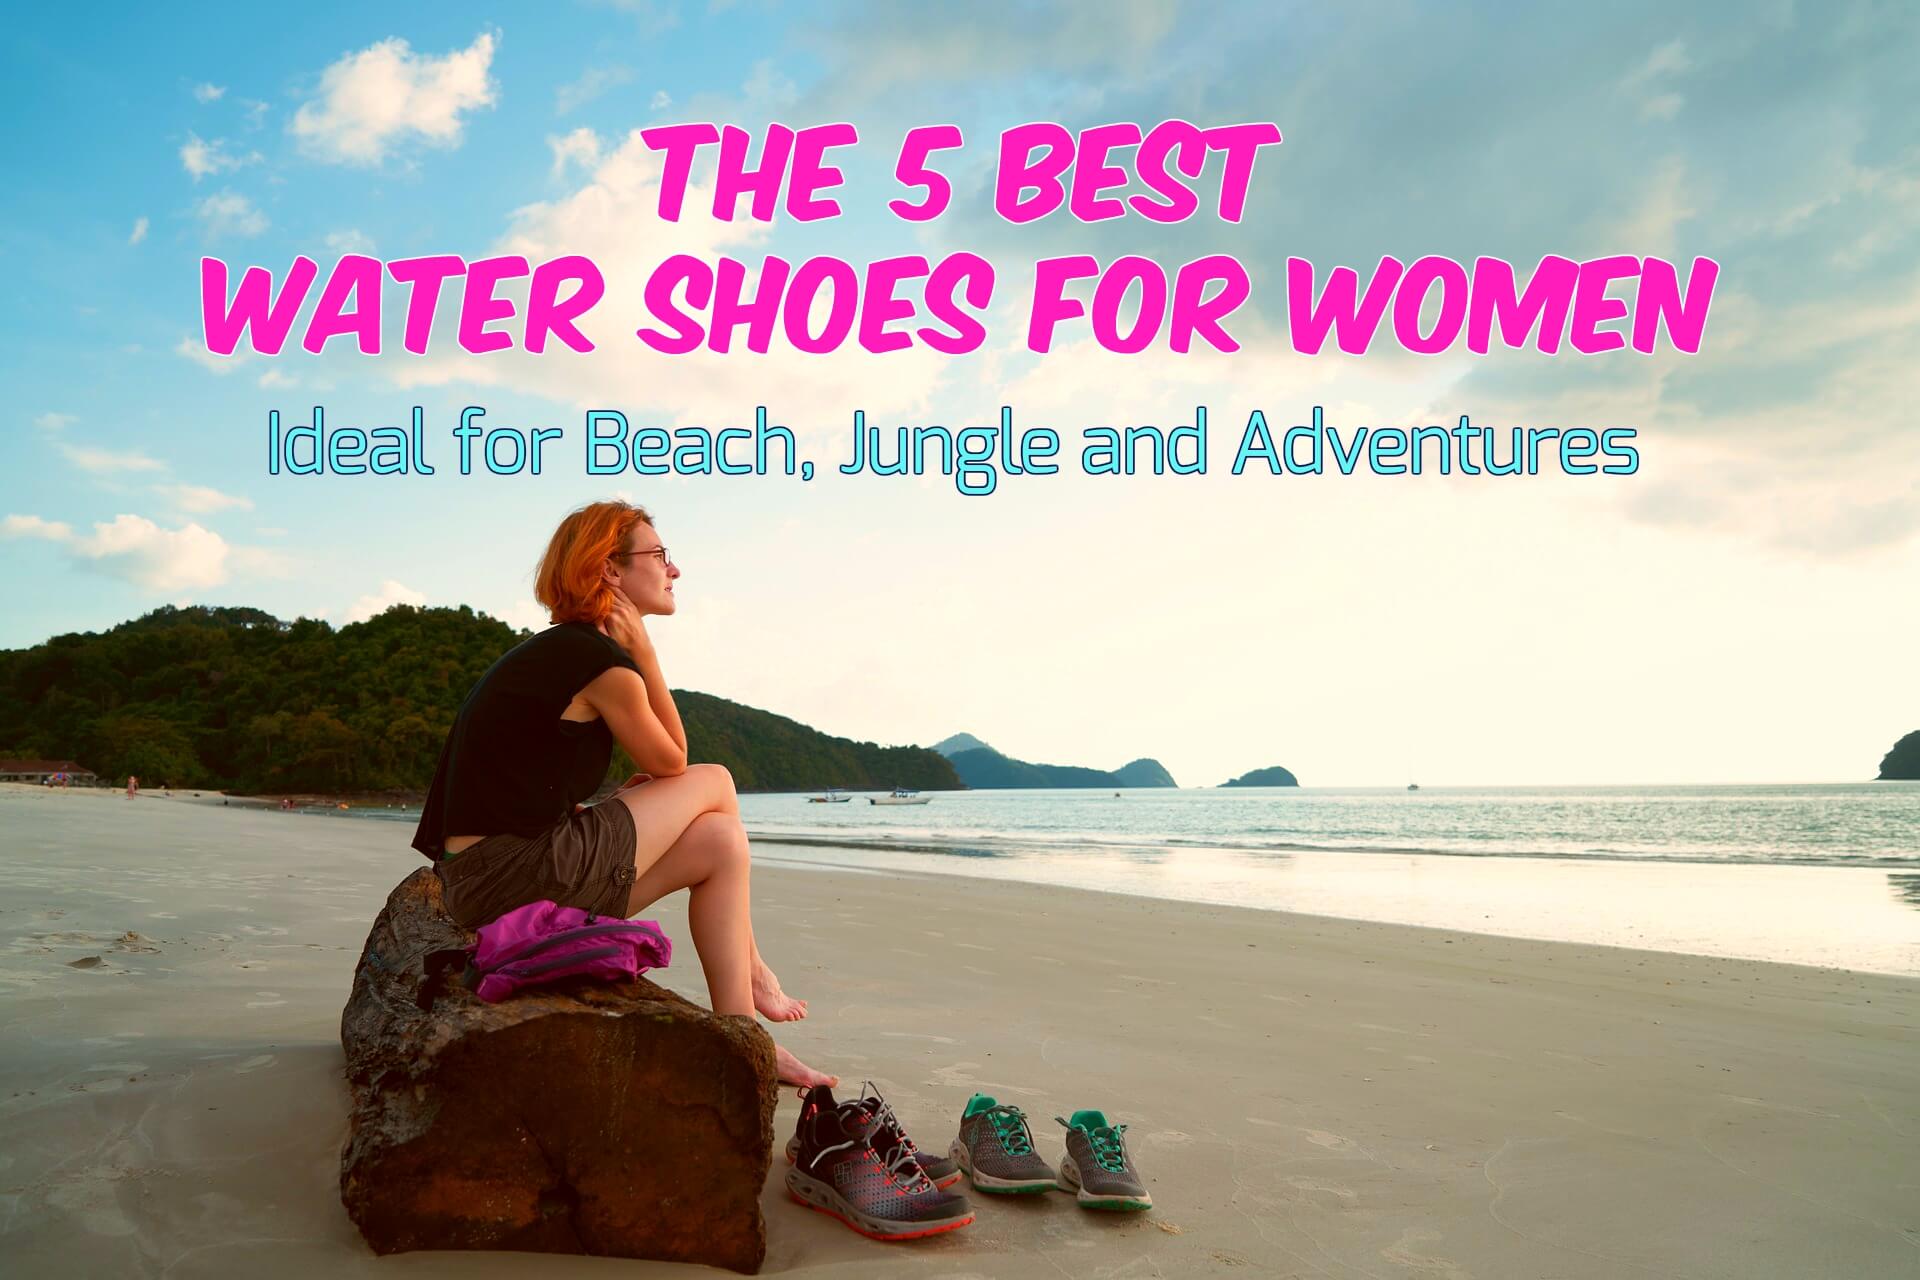 traveler woman sitting on the beach with shoes